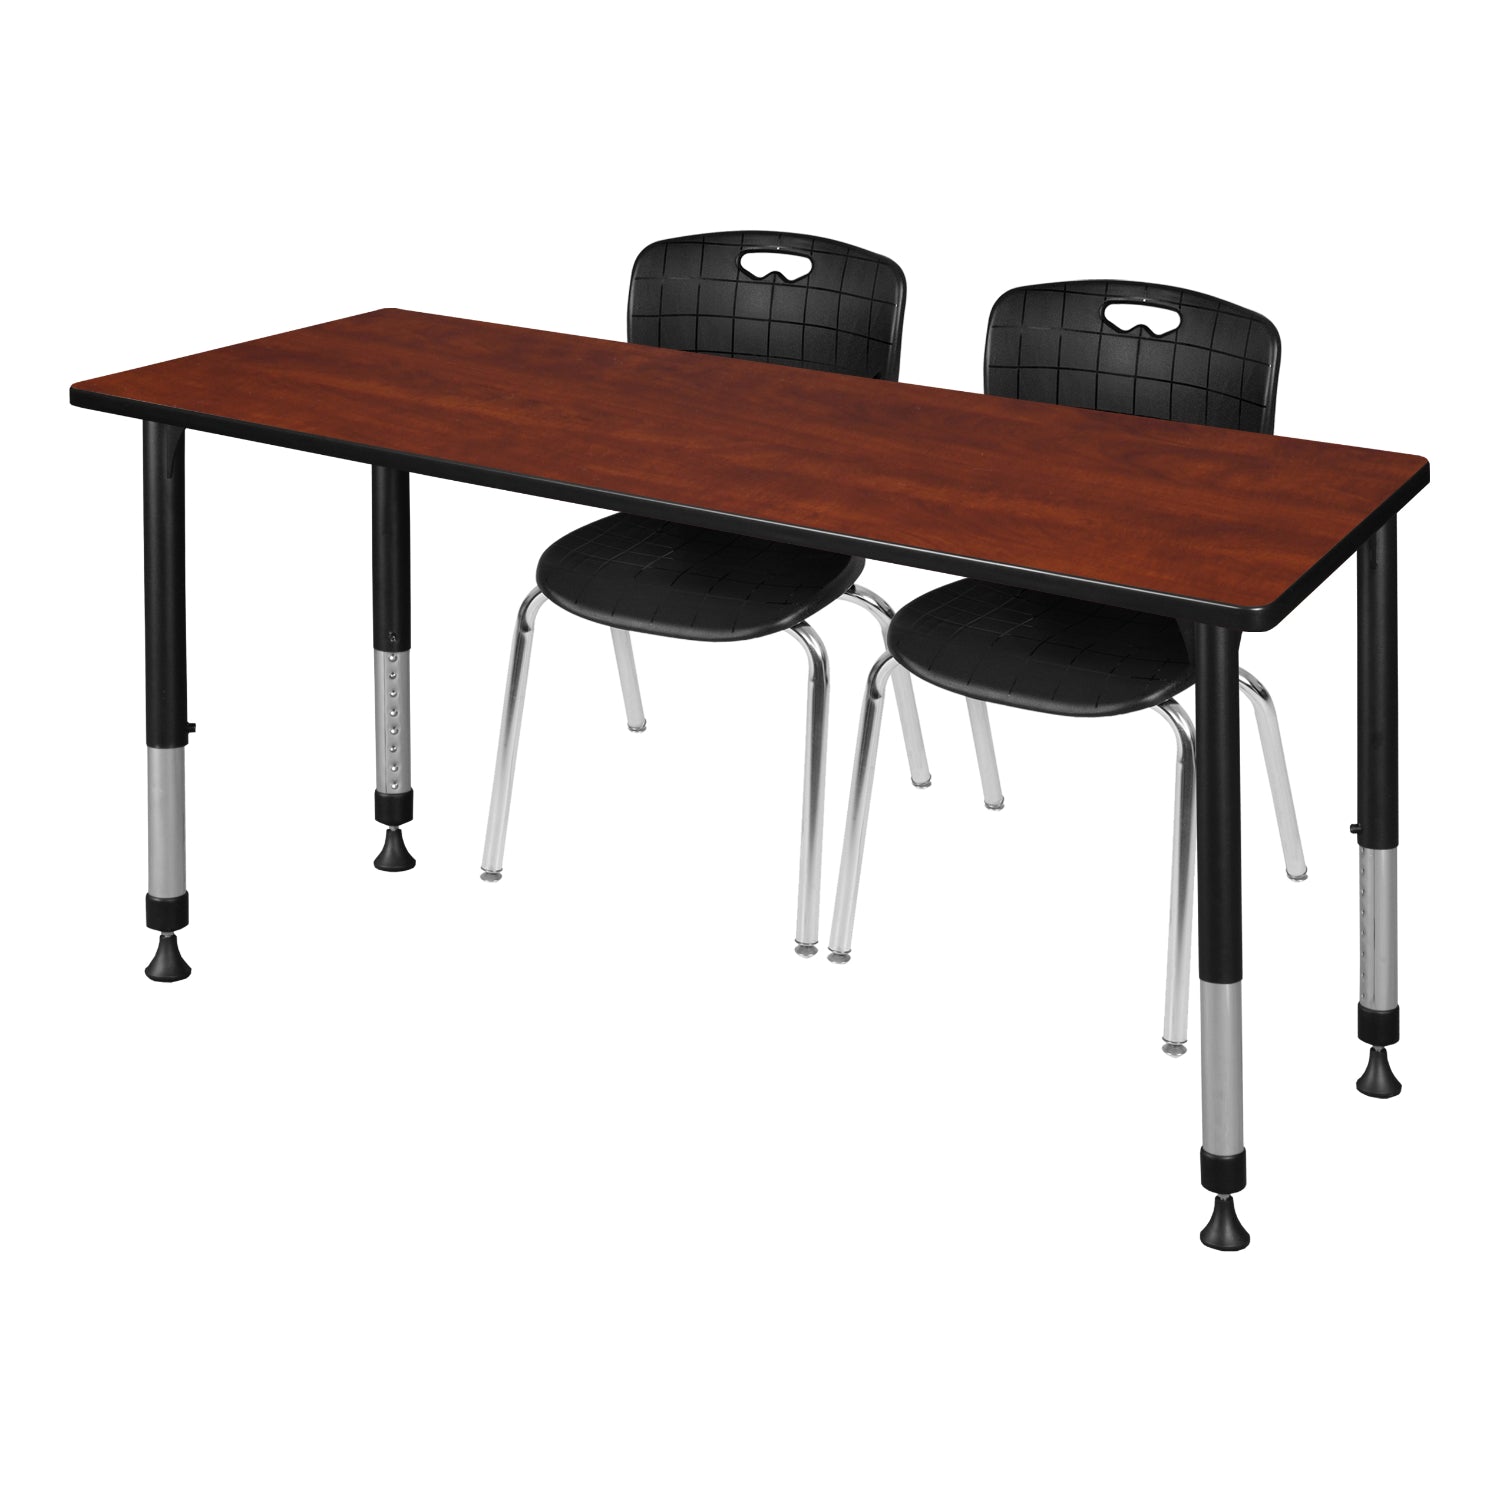 Kee Classroom Table and Chair Package, Kee 72" x 24" Rectangular Adjustable Height Table with 2 Andy 18" Stack Chairs